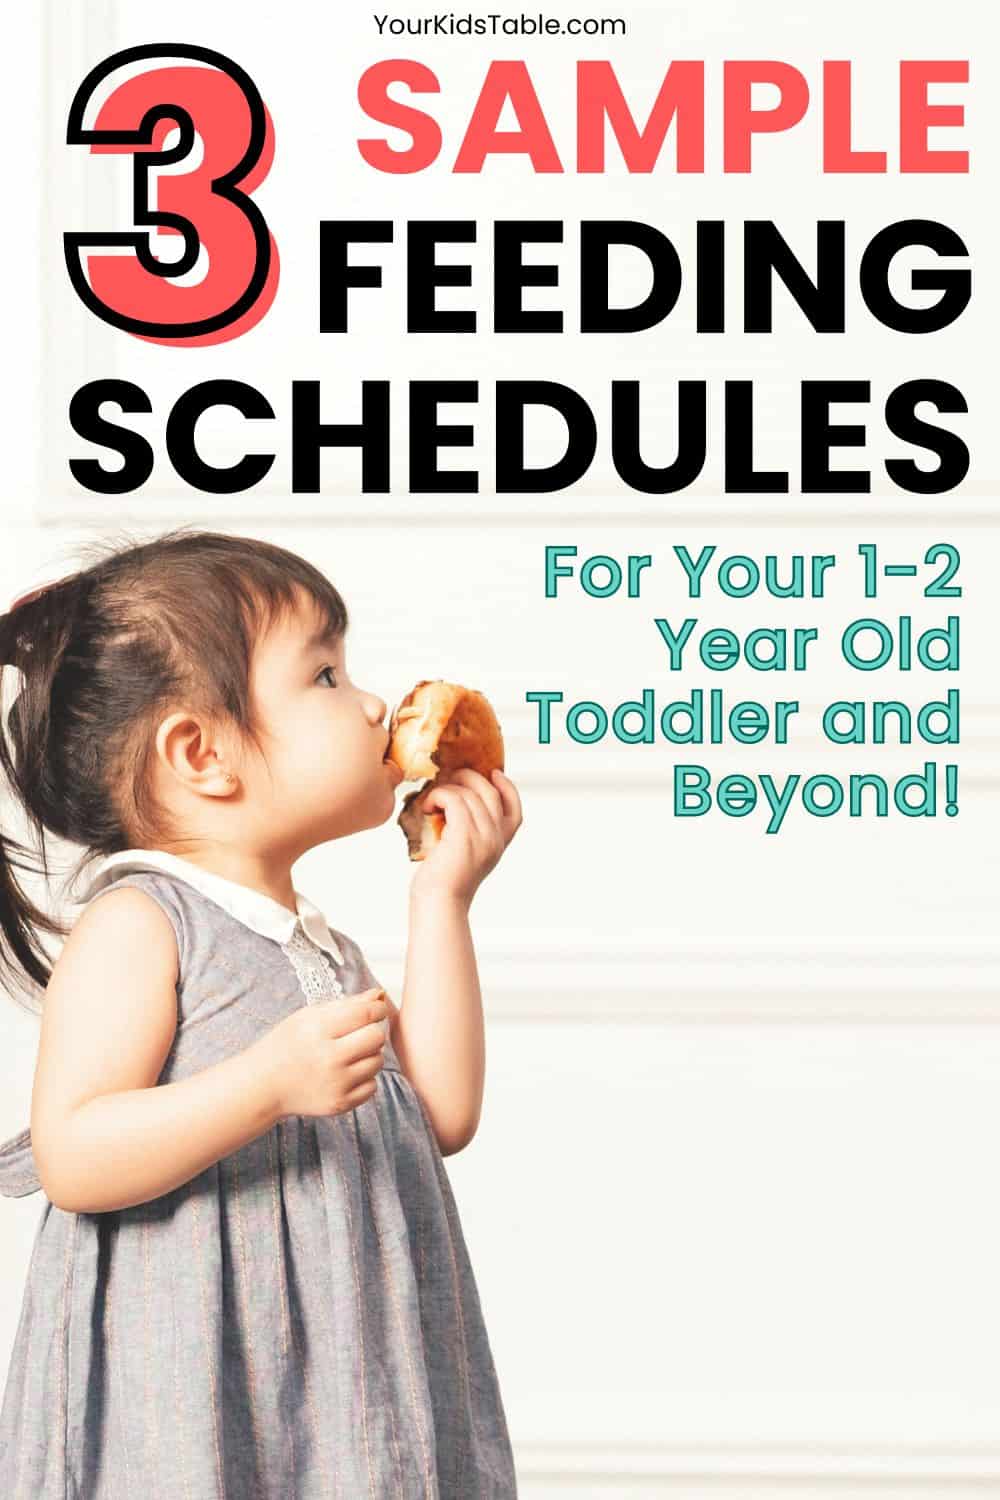 11, 12, and 13 months plus can be a difficult time to determine a toddler feeding schedule with so many transitions from baby food and bottles. Get these sample feeding schedules with milk for 1 year olds from a feeding expert and mom.